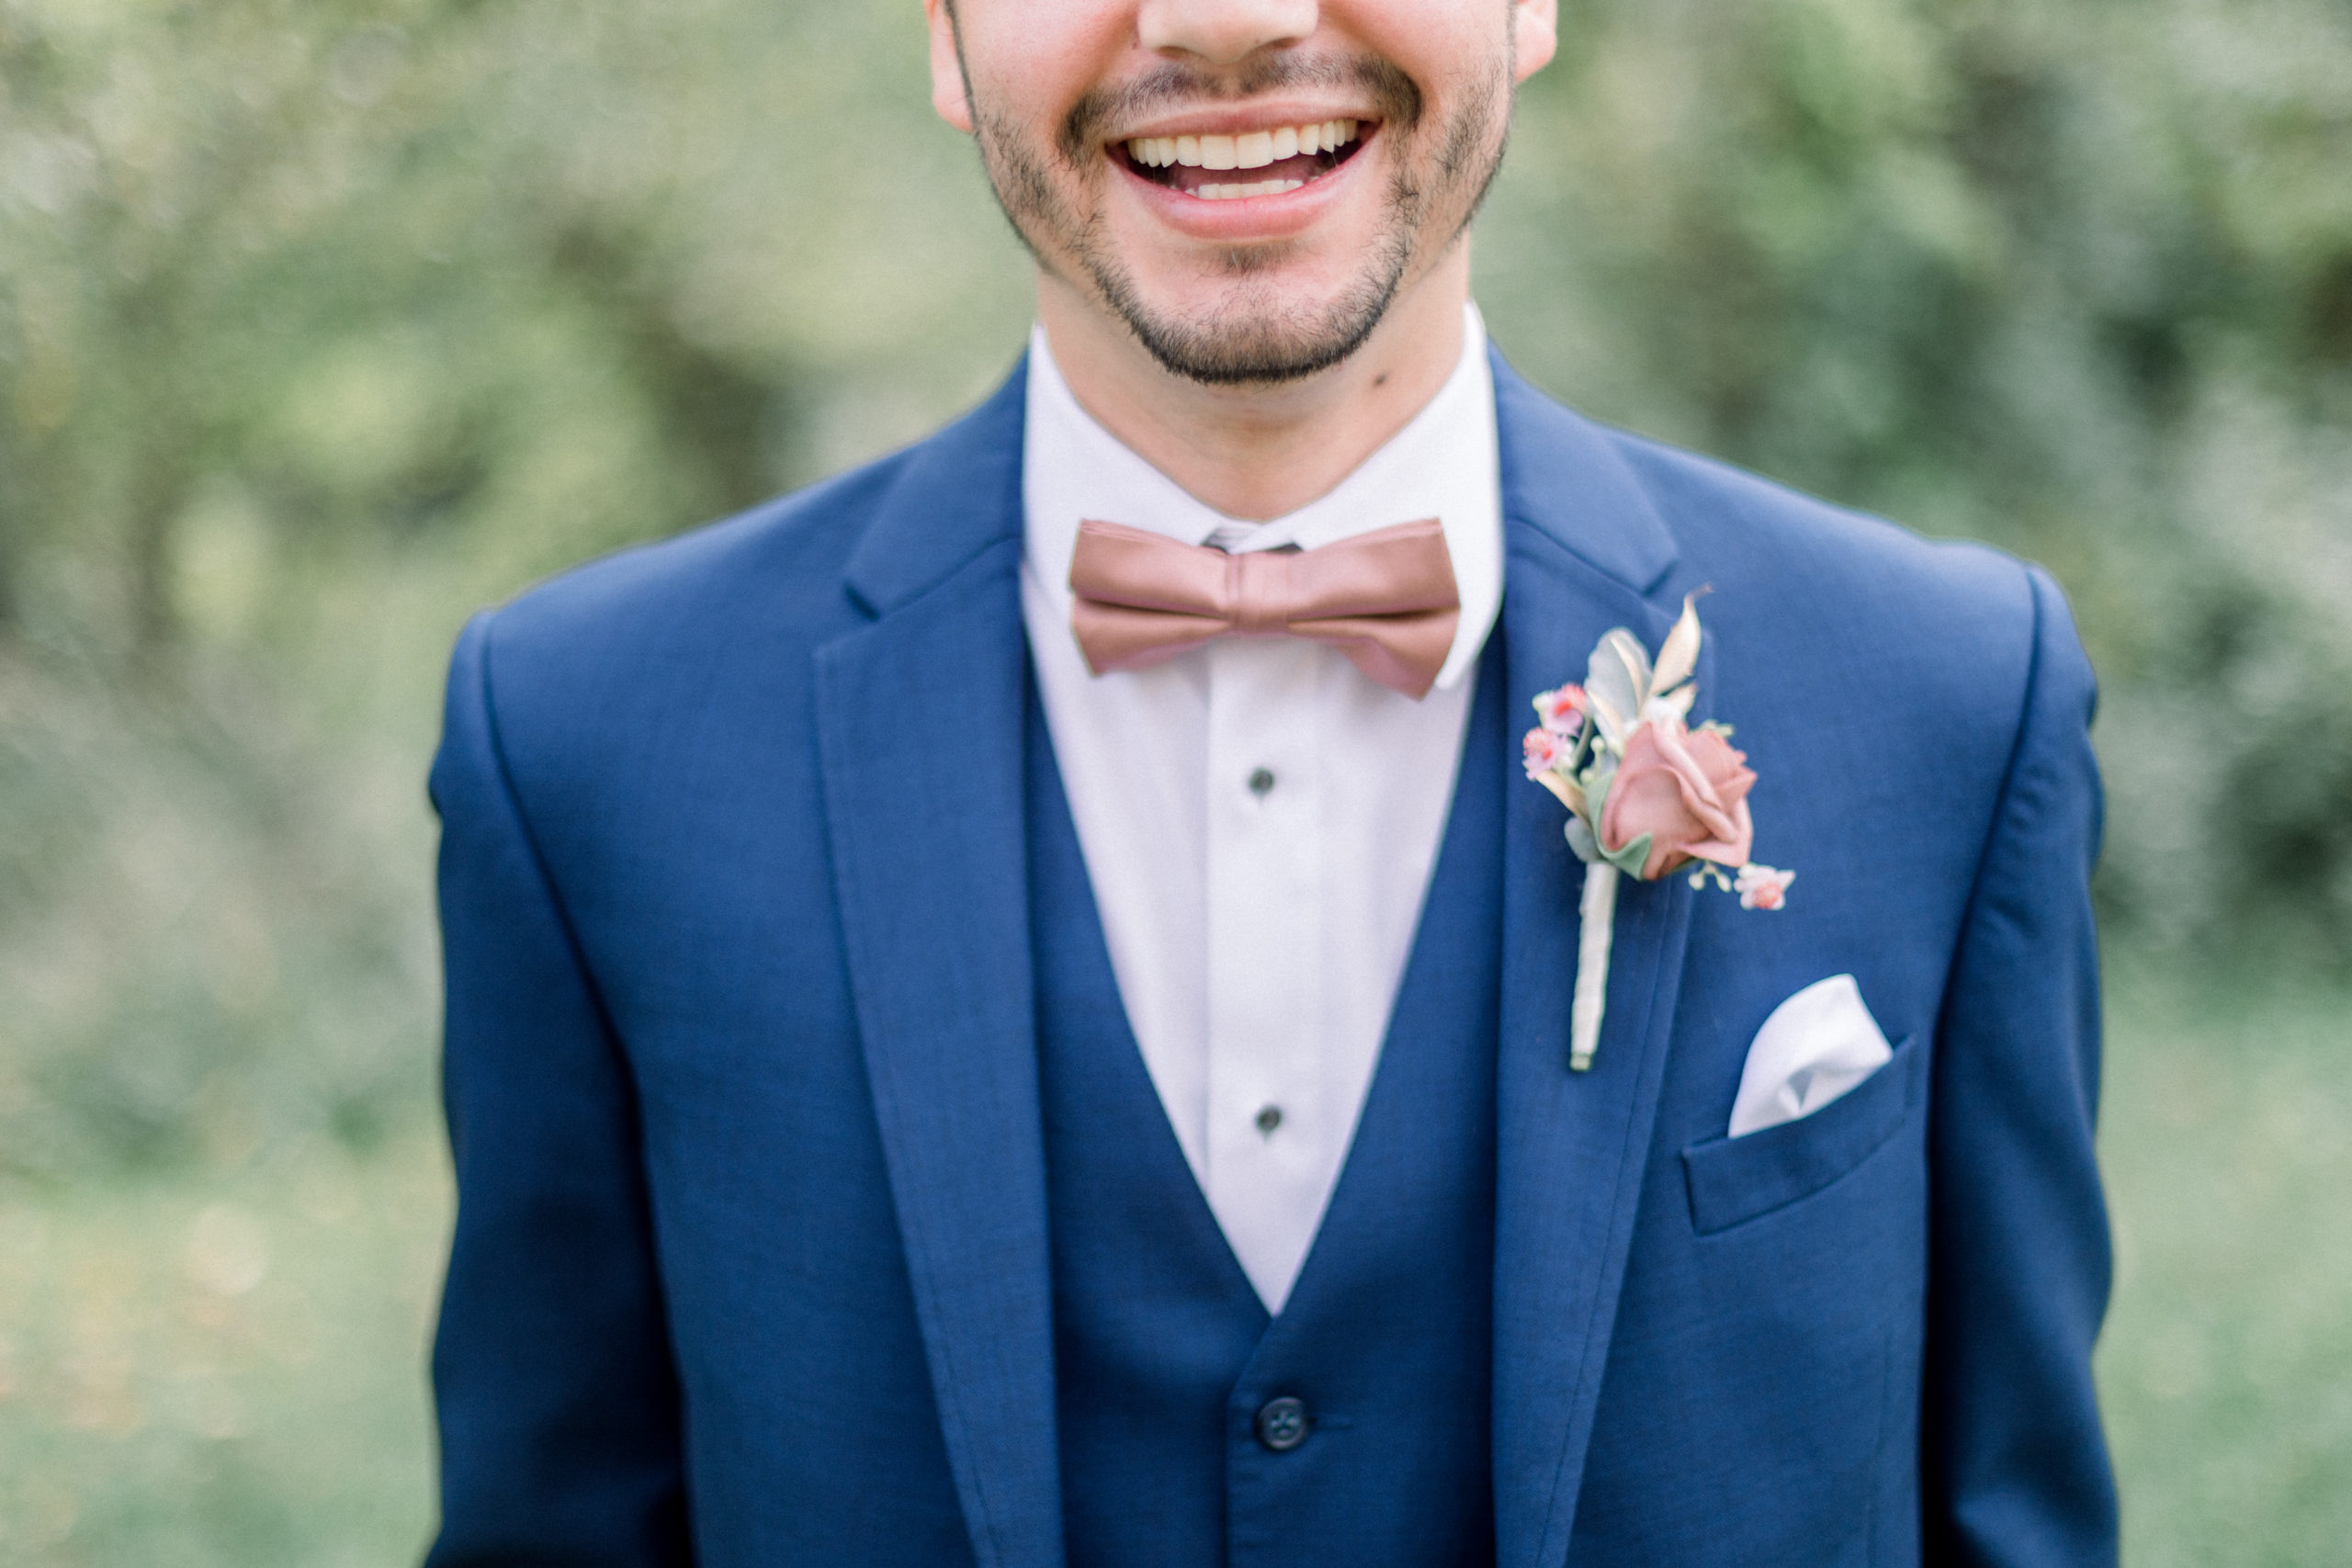 close up of groom's attire and his smile